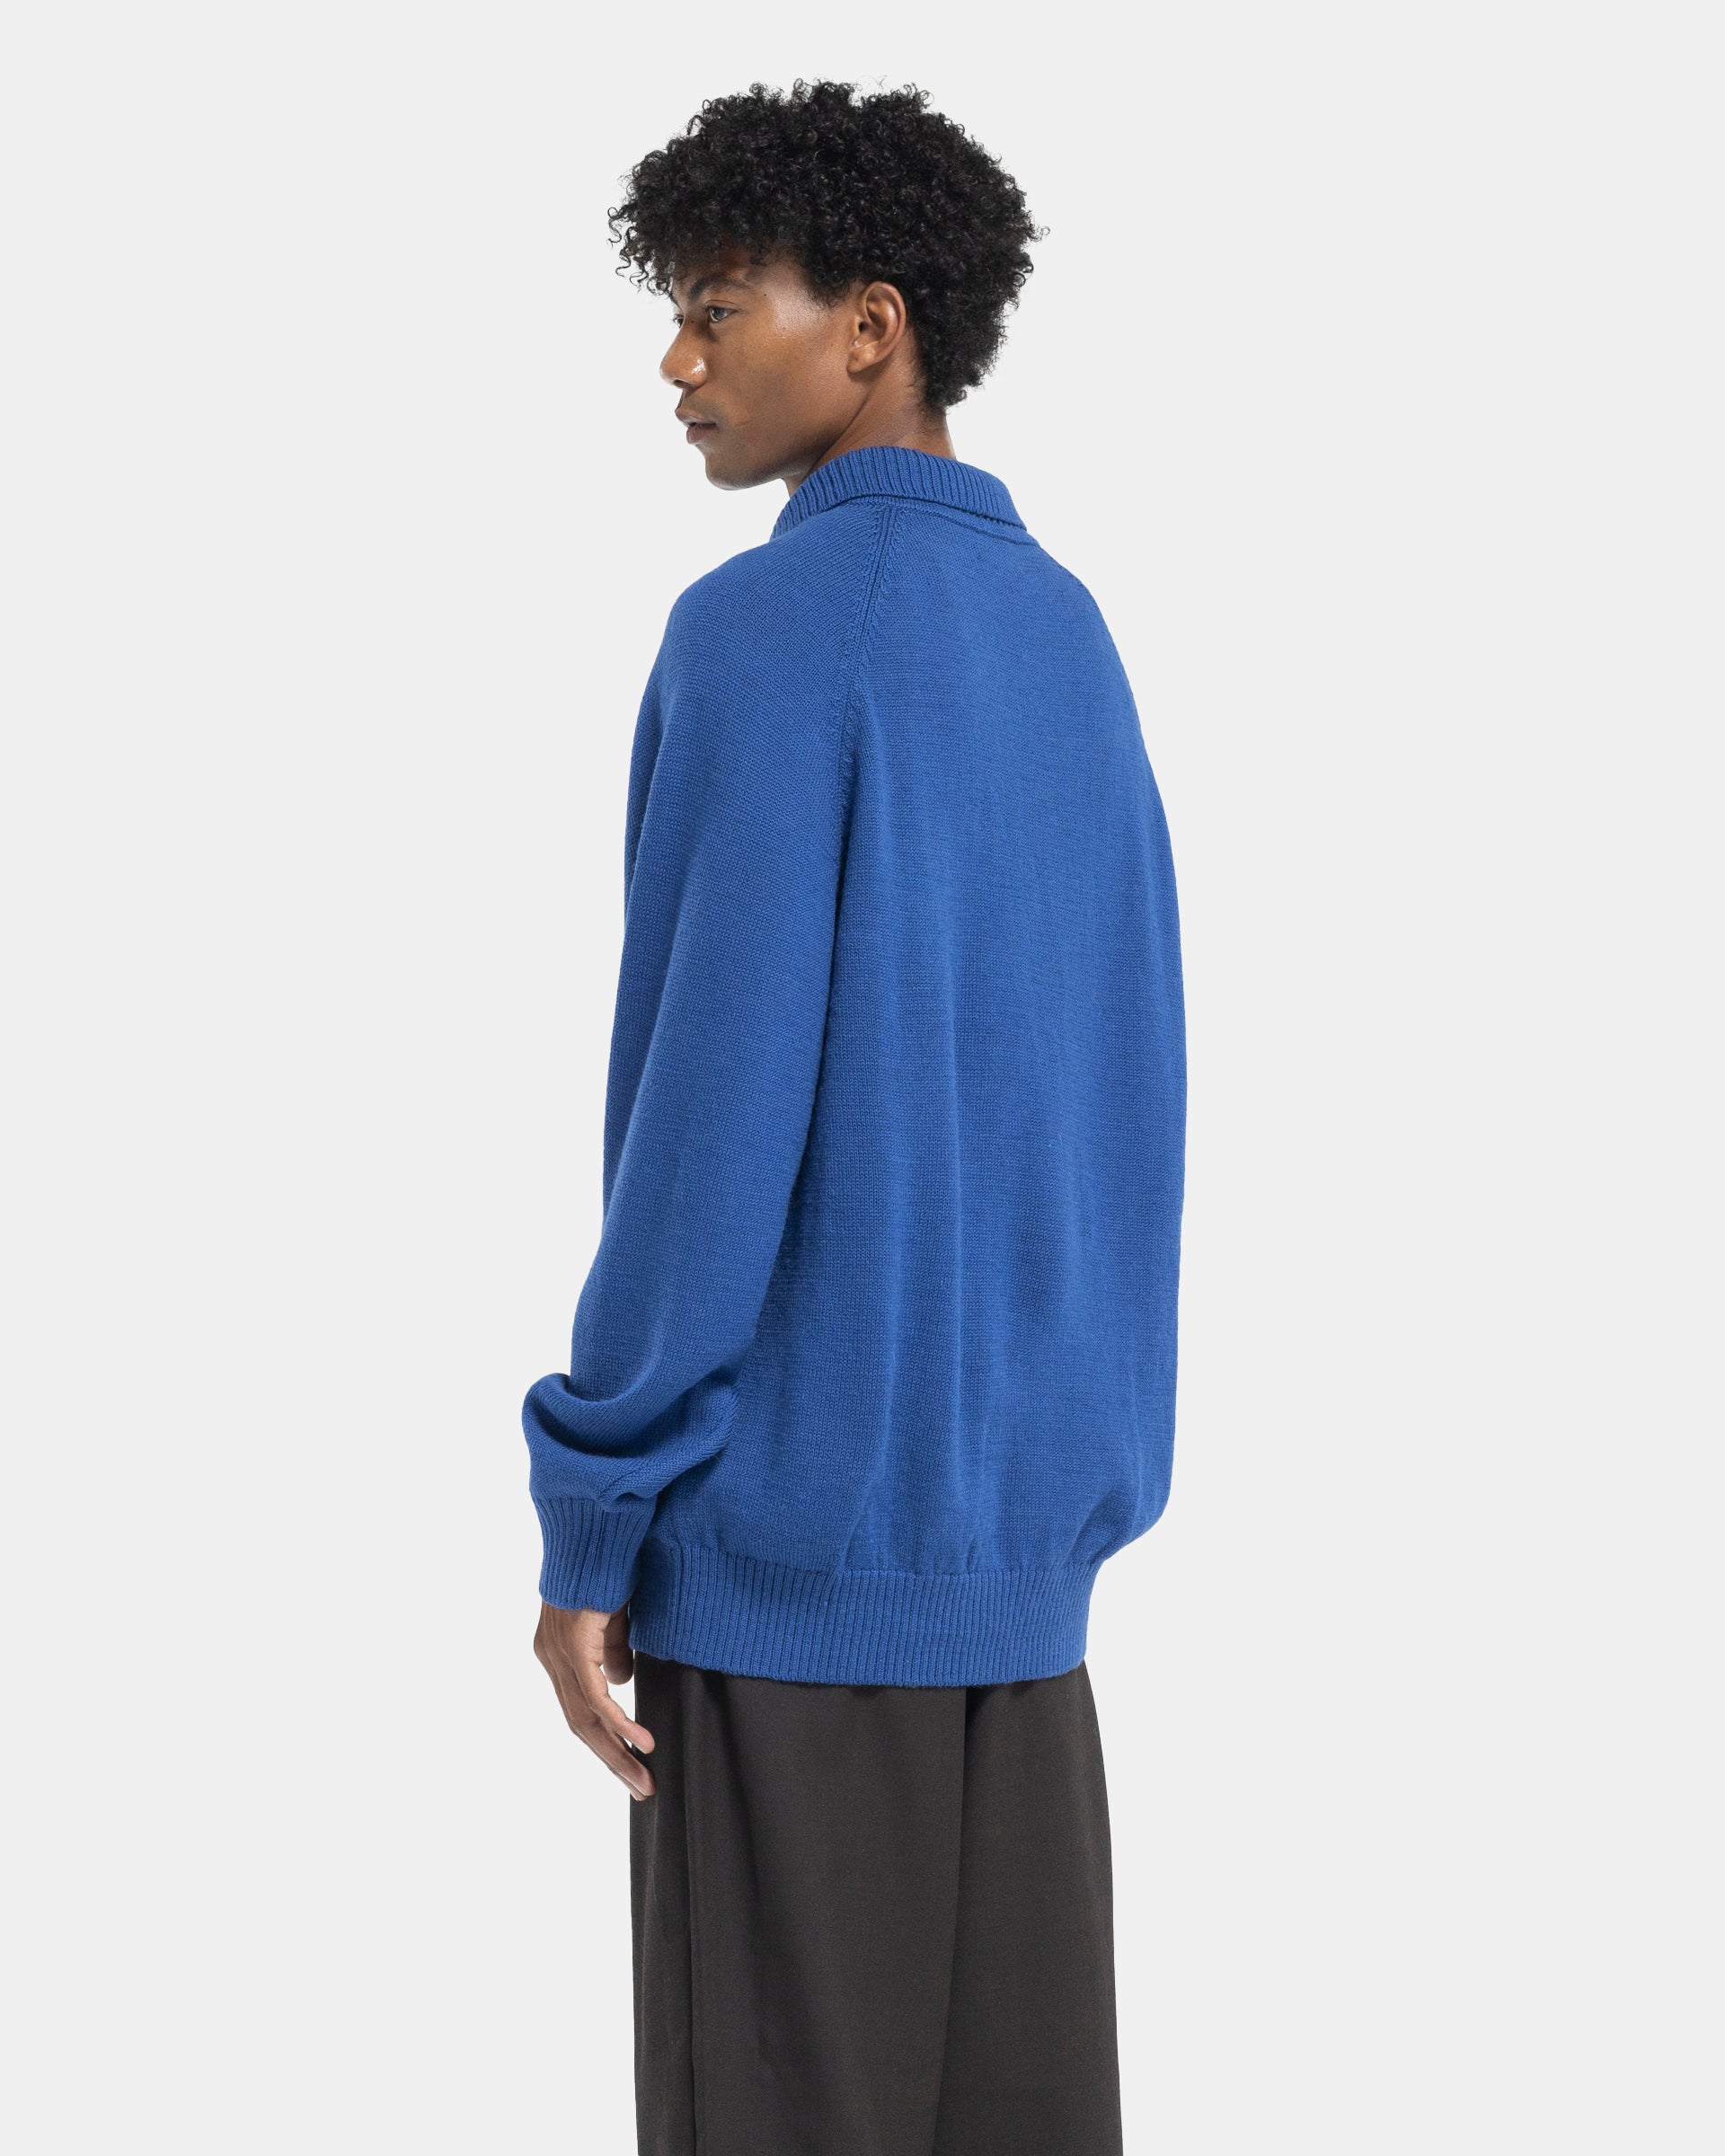 7G Knit Polo in Royal Blue